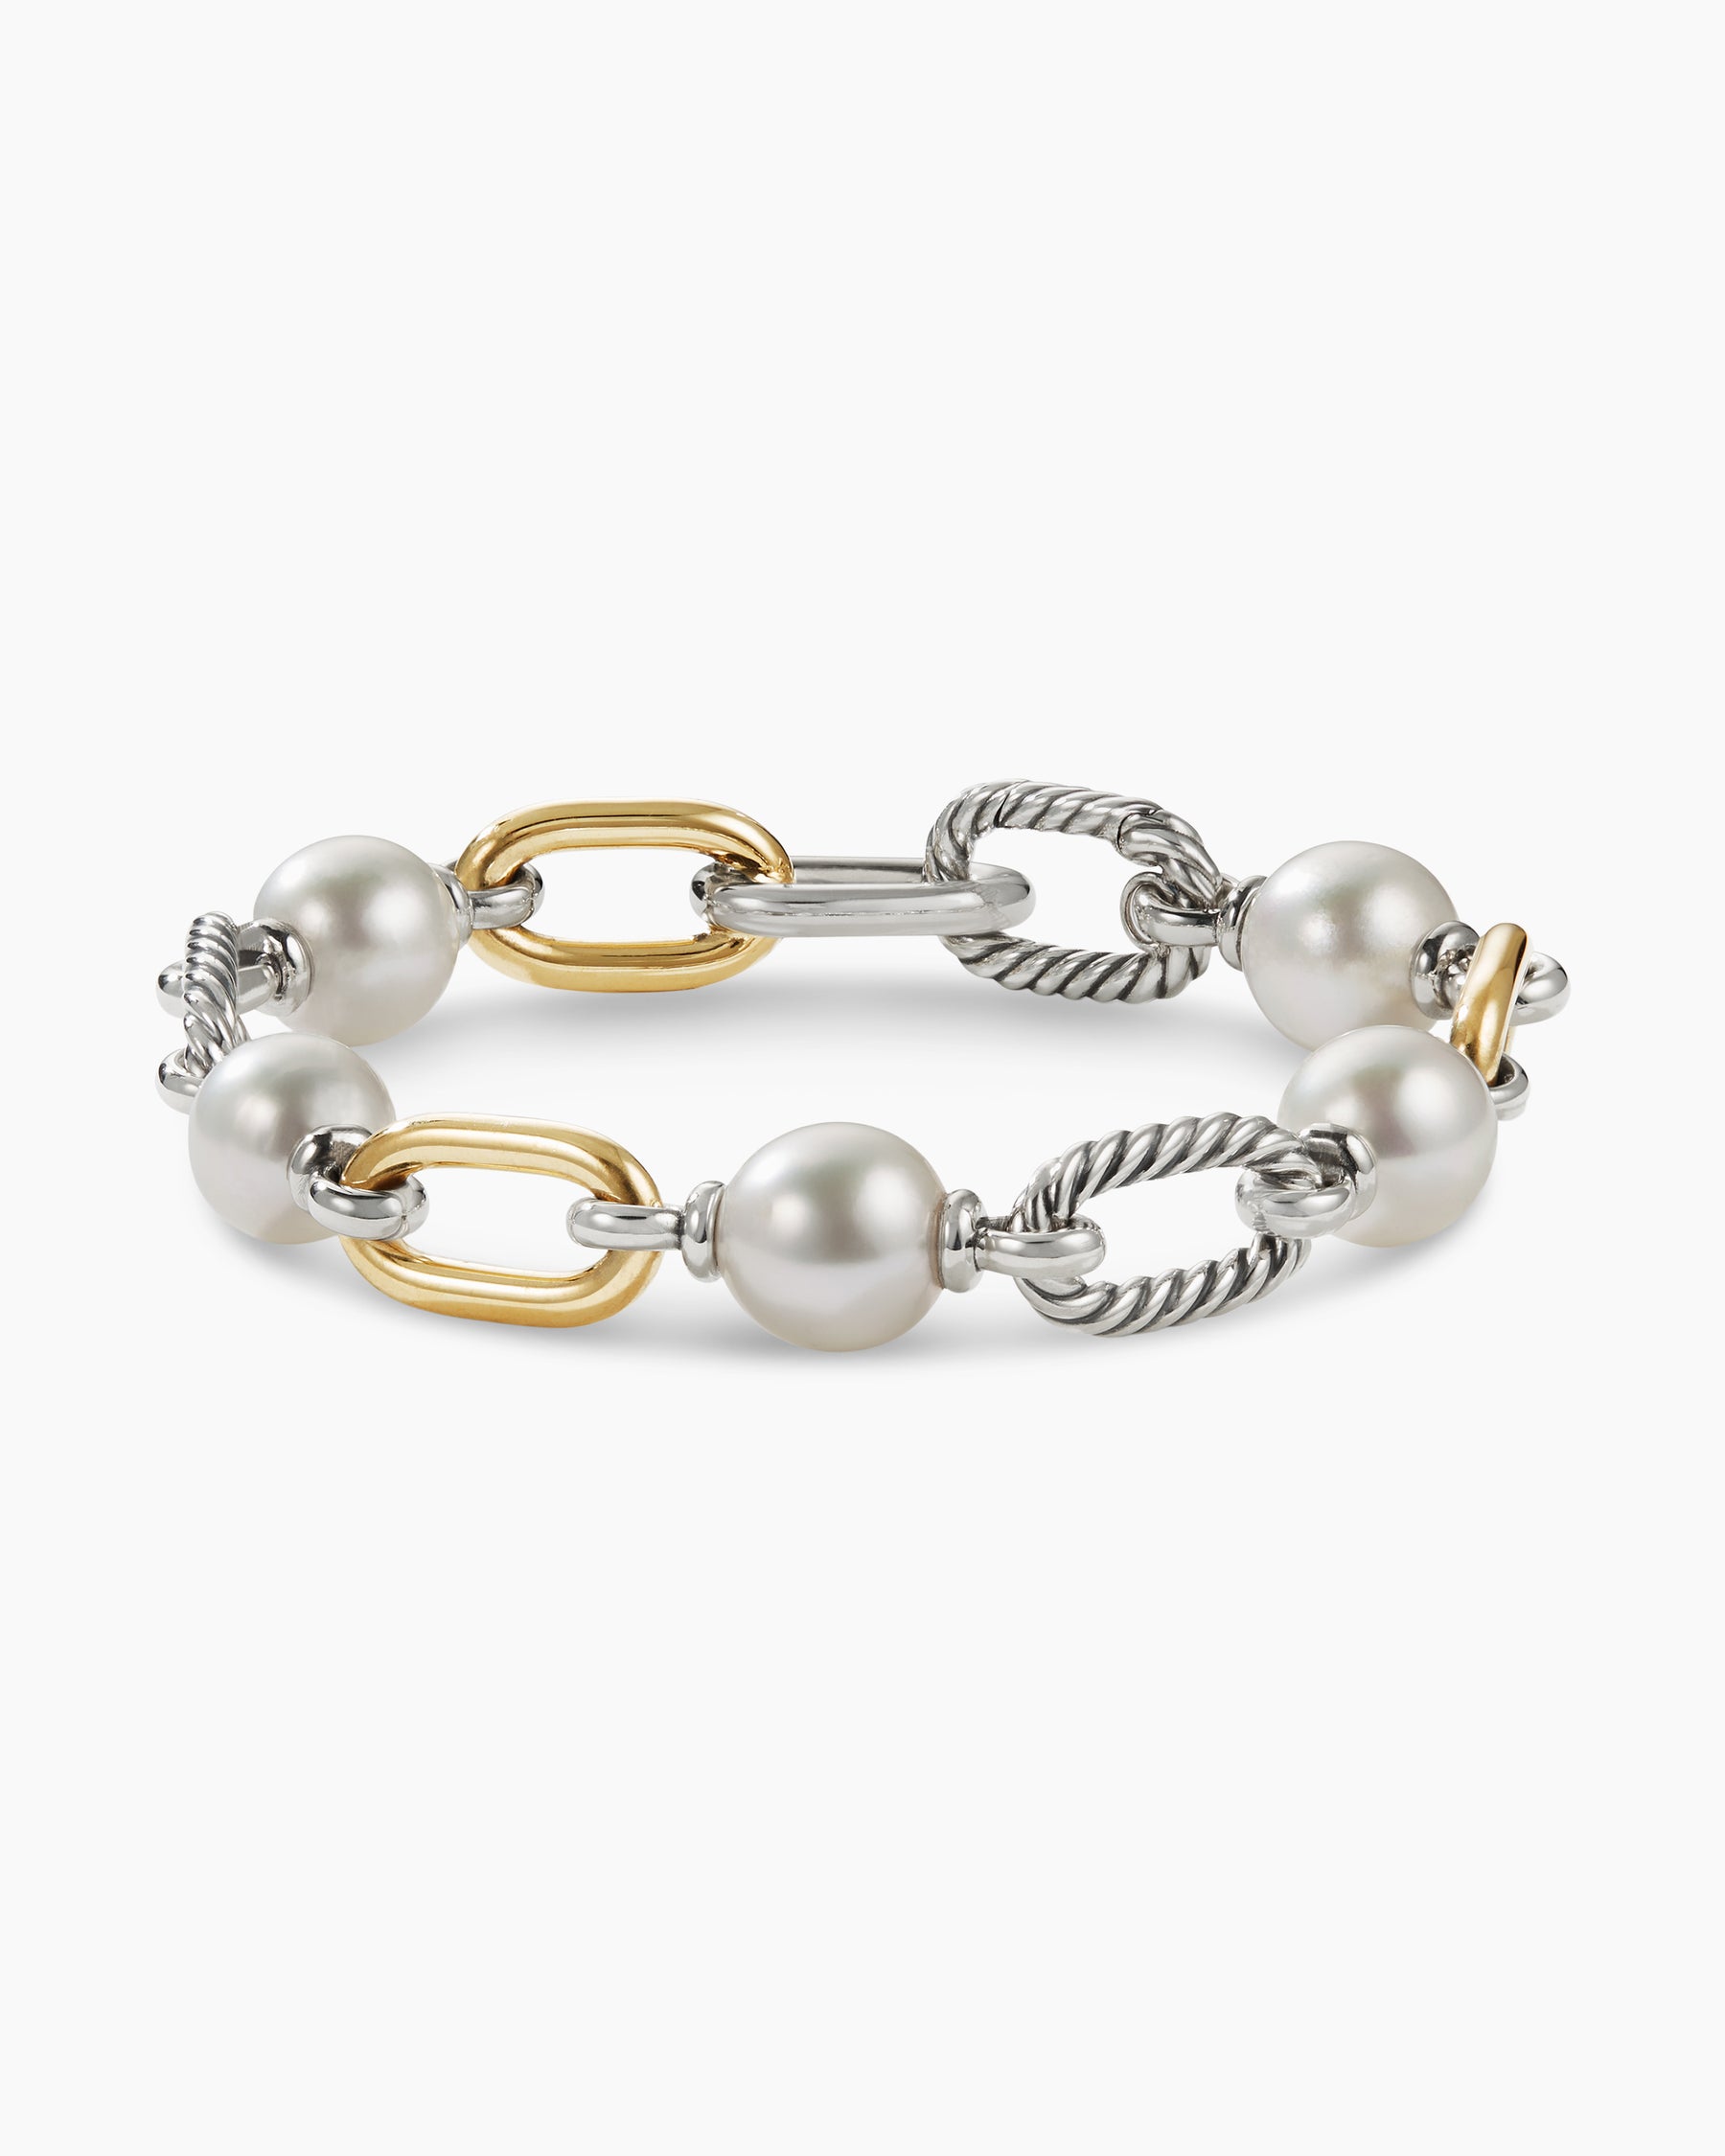 DY Madison® Chain Bracelet in Sterling Silver with 18K Yellow Gold, 11mm